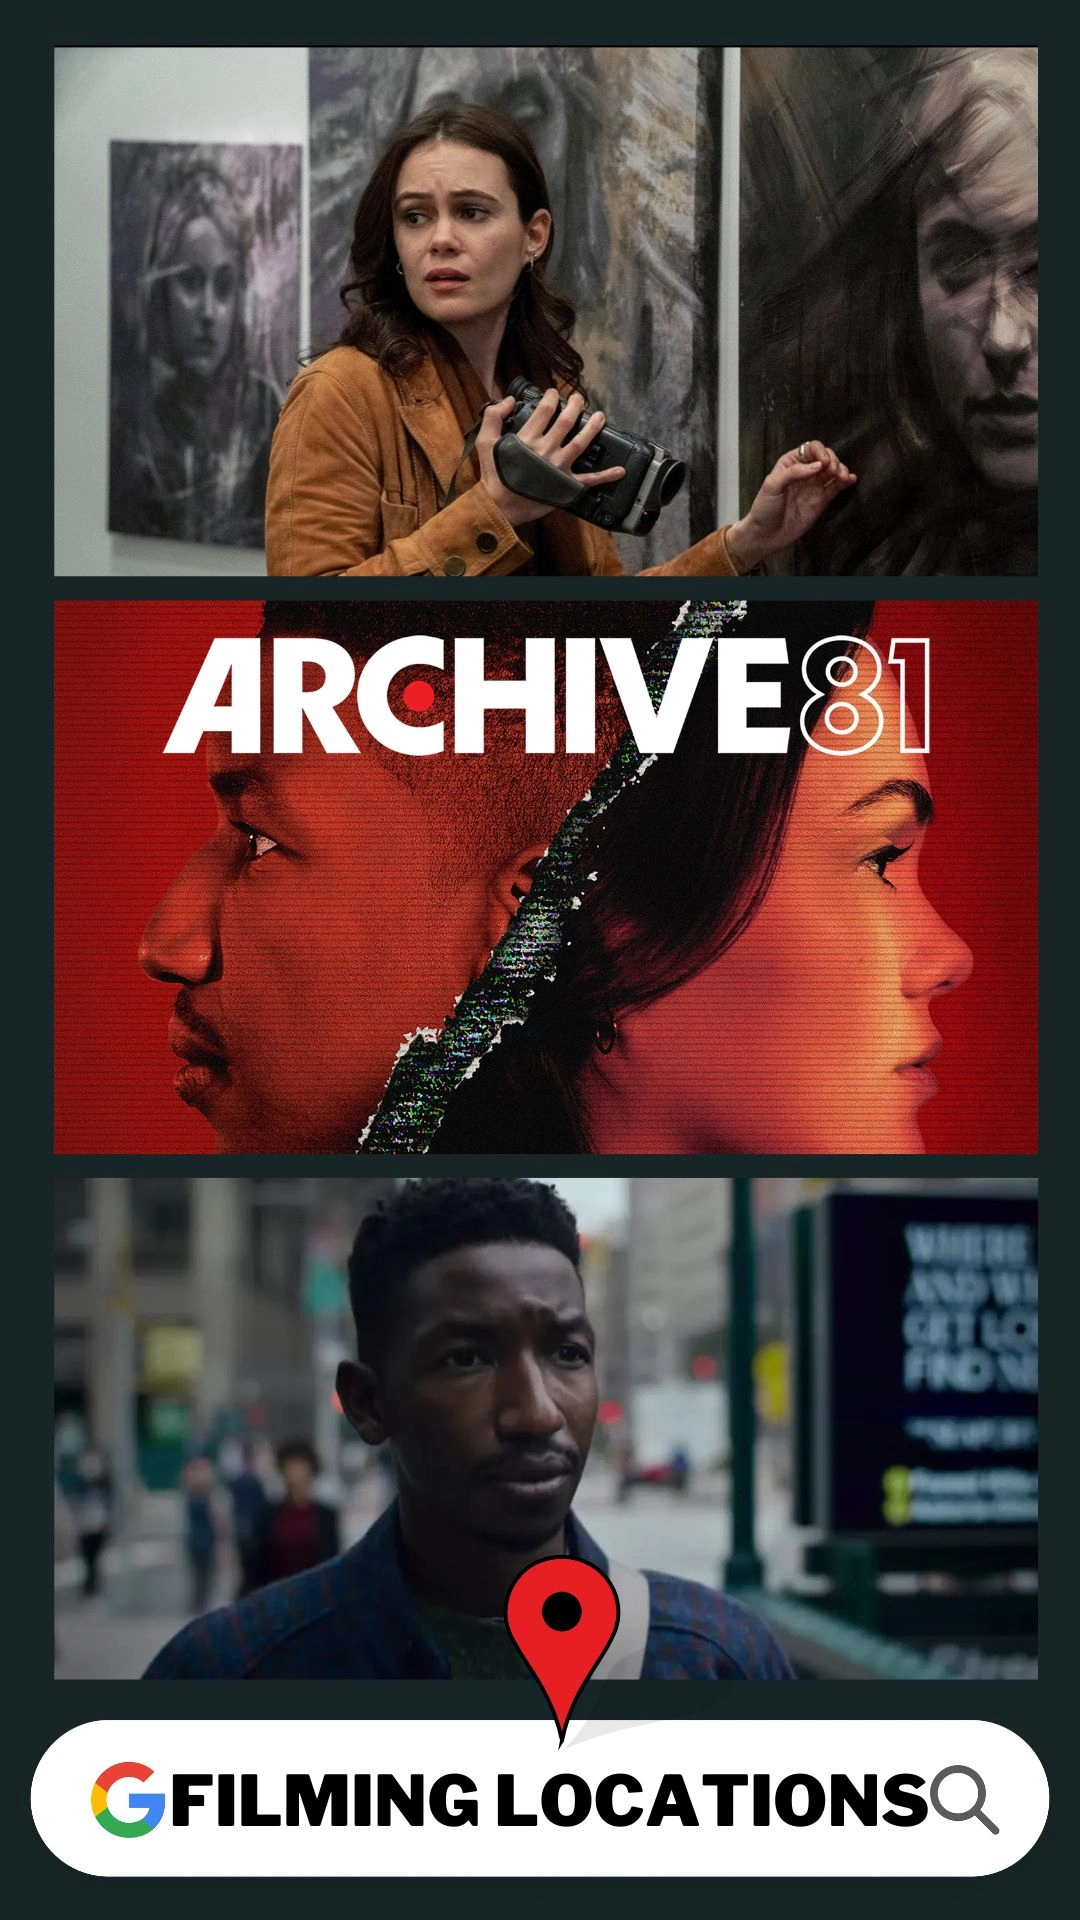 Archive 81 Filming Locations